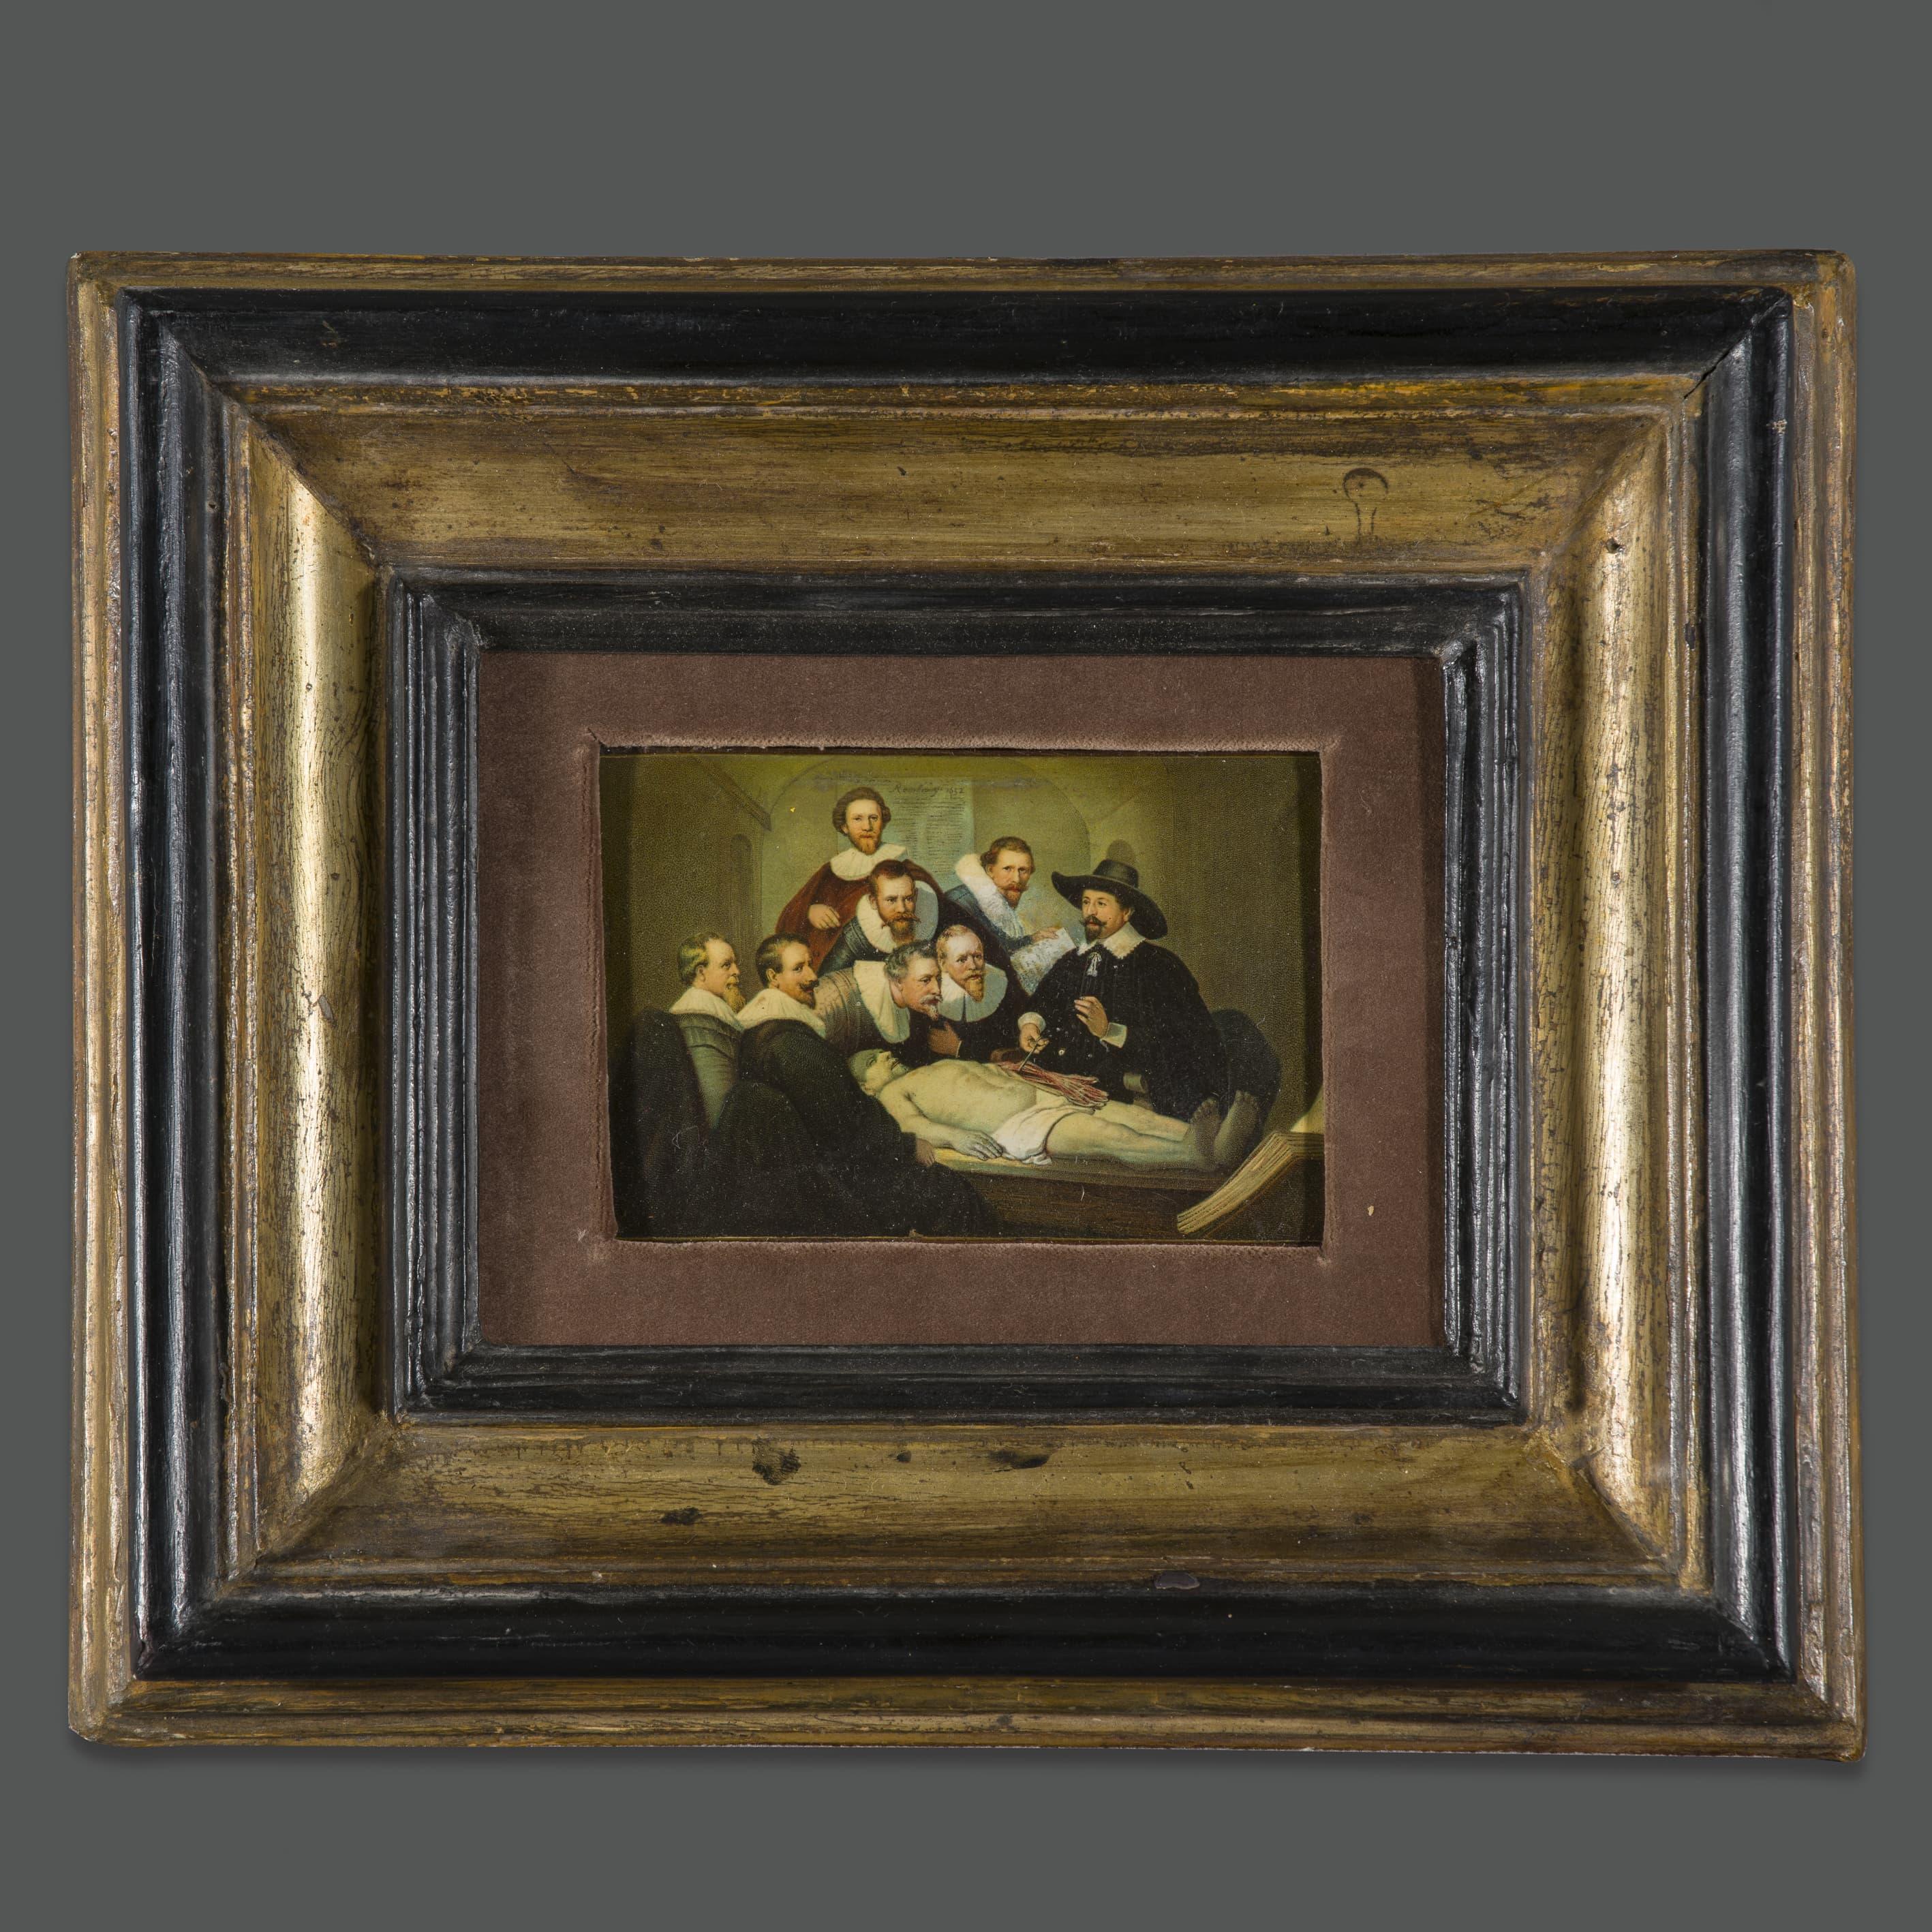 Pair of important oil paintings by a follower of Rembrant 
The two works represent two celebrated paintings : 